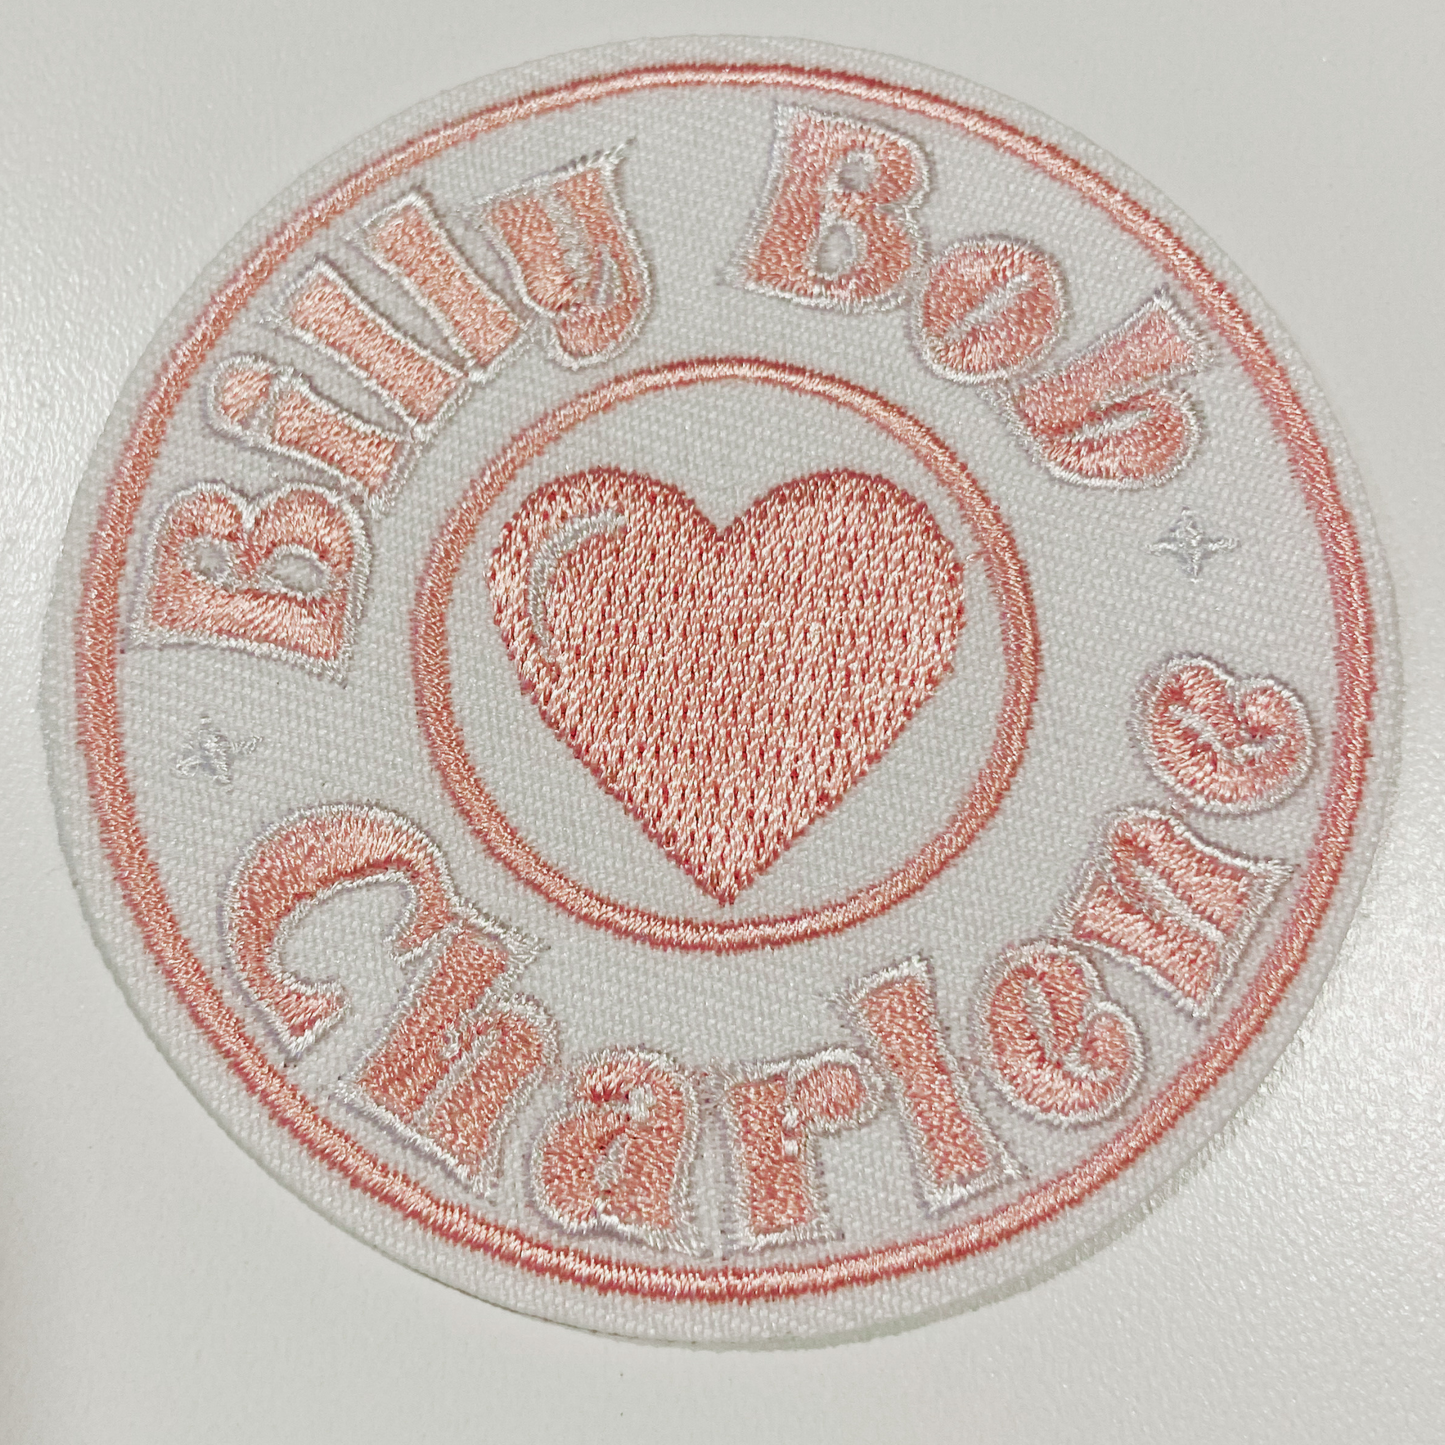 3" Billy Bob <3 Charlene -  Embroidered Hat Patch